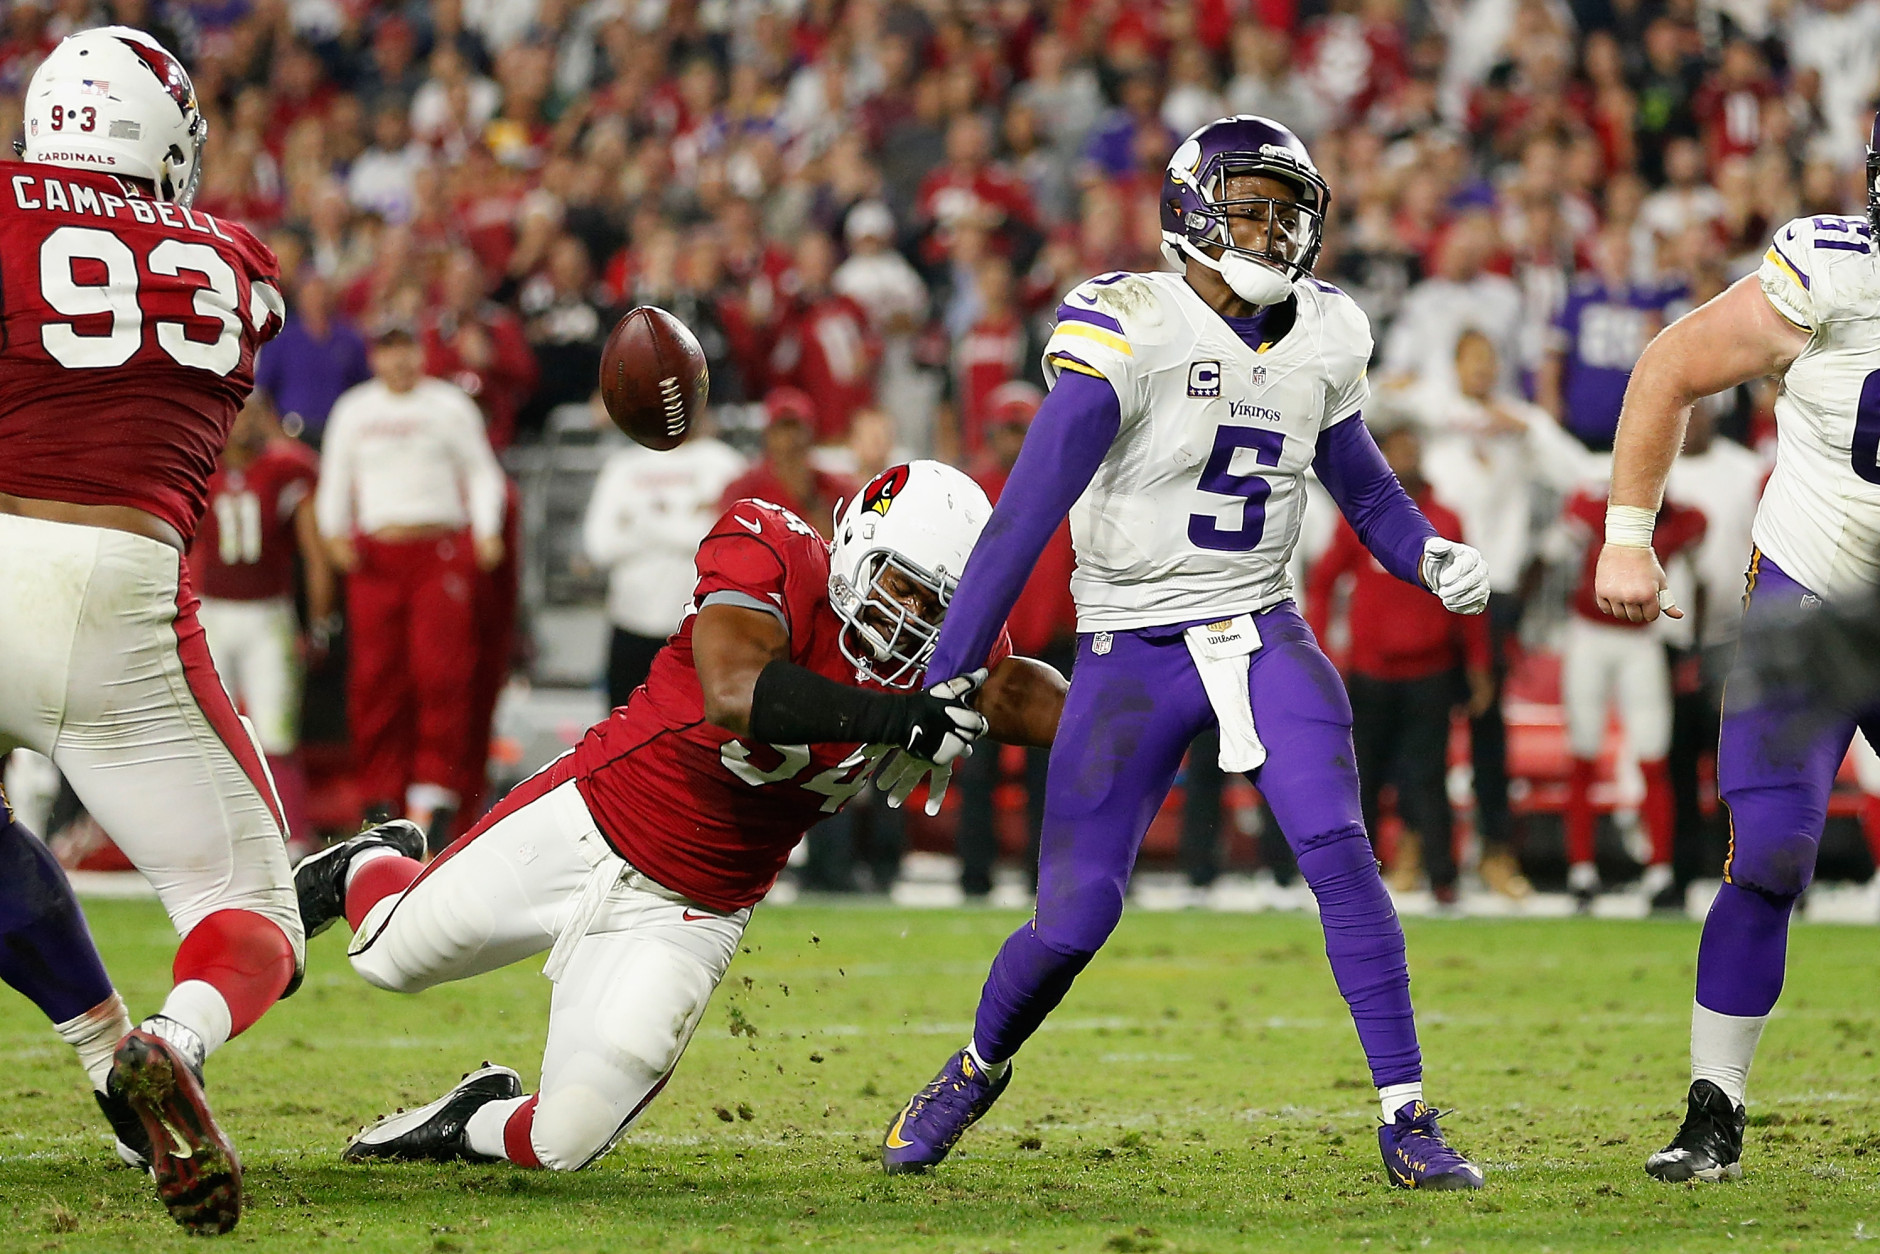 GLENDALE, AZ - DECEMBER 10:  Quarterback Teddy Bridgewater #5 of the Minnesota Vikings has the ball knocked free by inside linebacker Dwight Freeney #54 of the Arizona Cardinals during the final moments of the NFL game at the University of Phoenix Stadium on December 10, 2015 in Glendale, Arizona. The Cardinals defeated the Vikings 23-20.  (Photo by Christian Petersen/Getty Images)